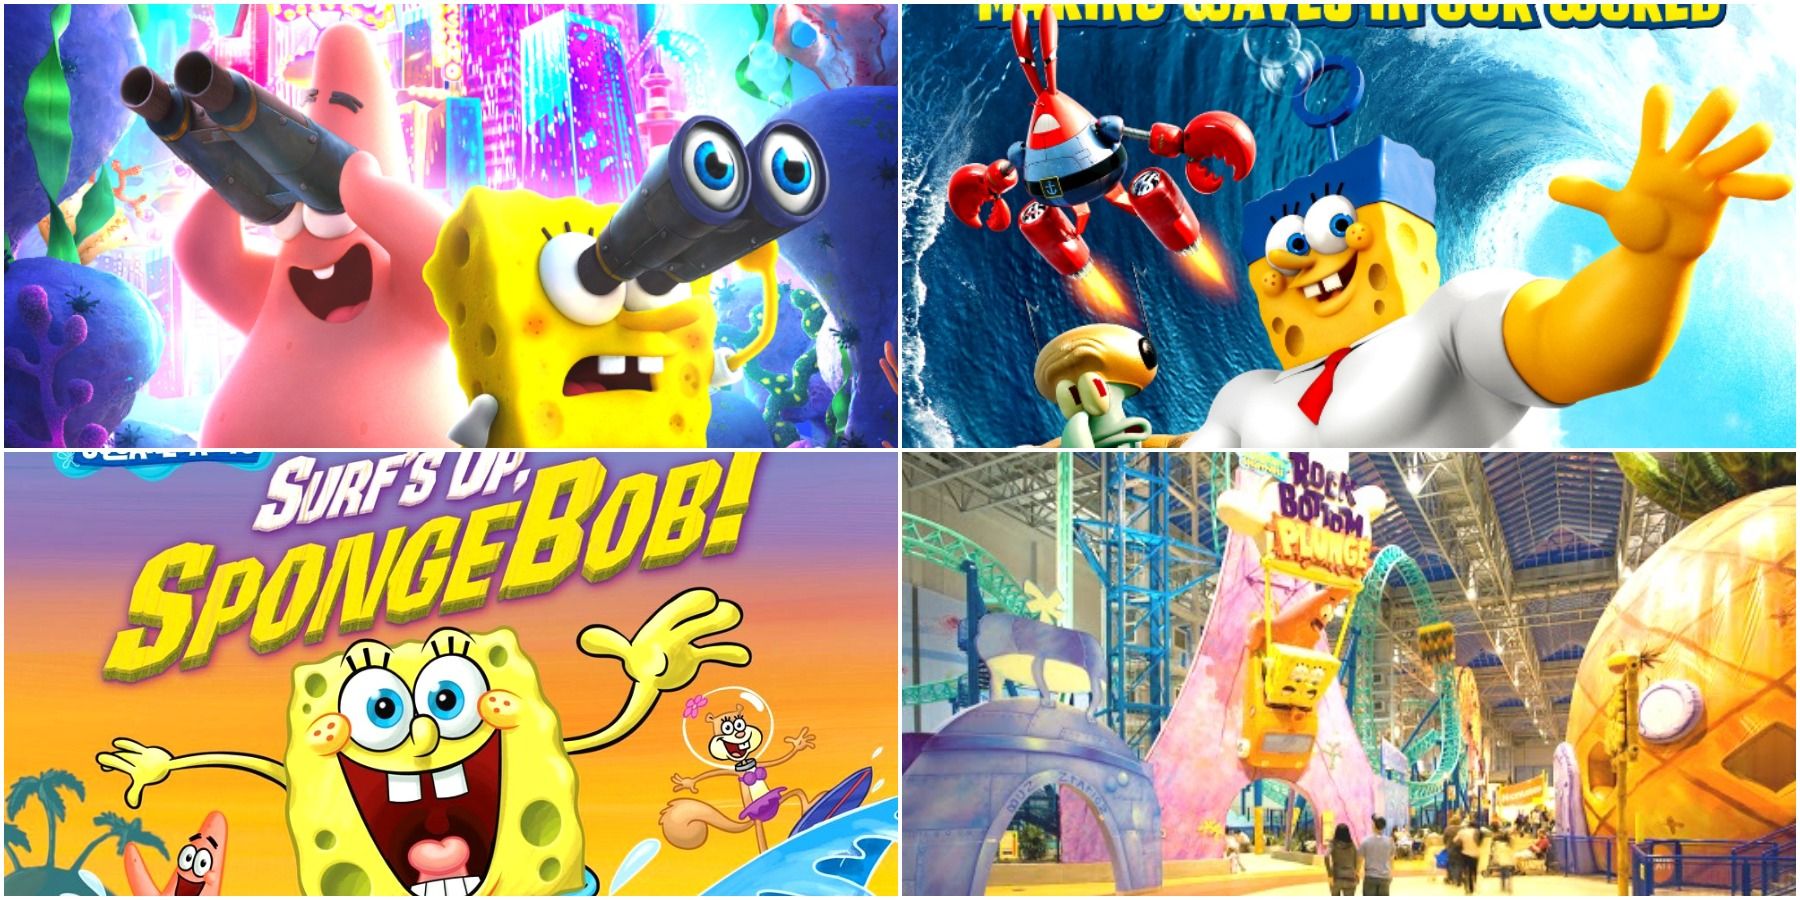 The SpongeBob Movies, Books, and Amusement Park Ride based off the TV show